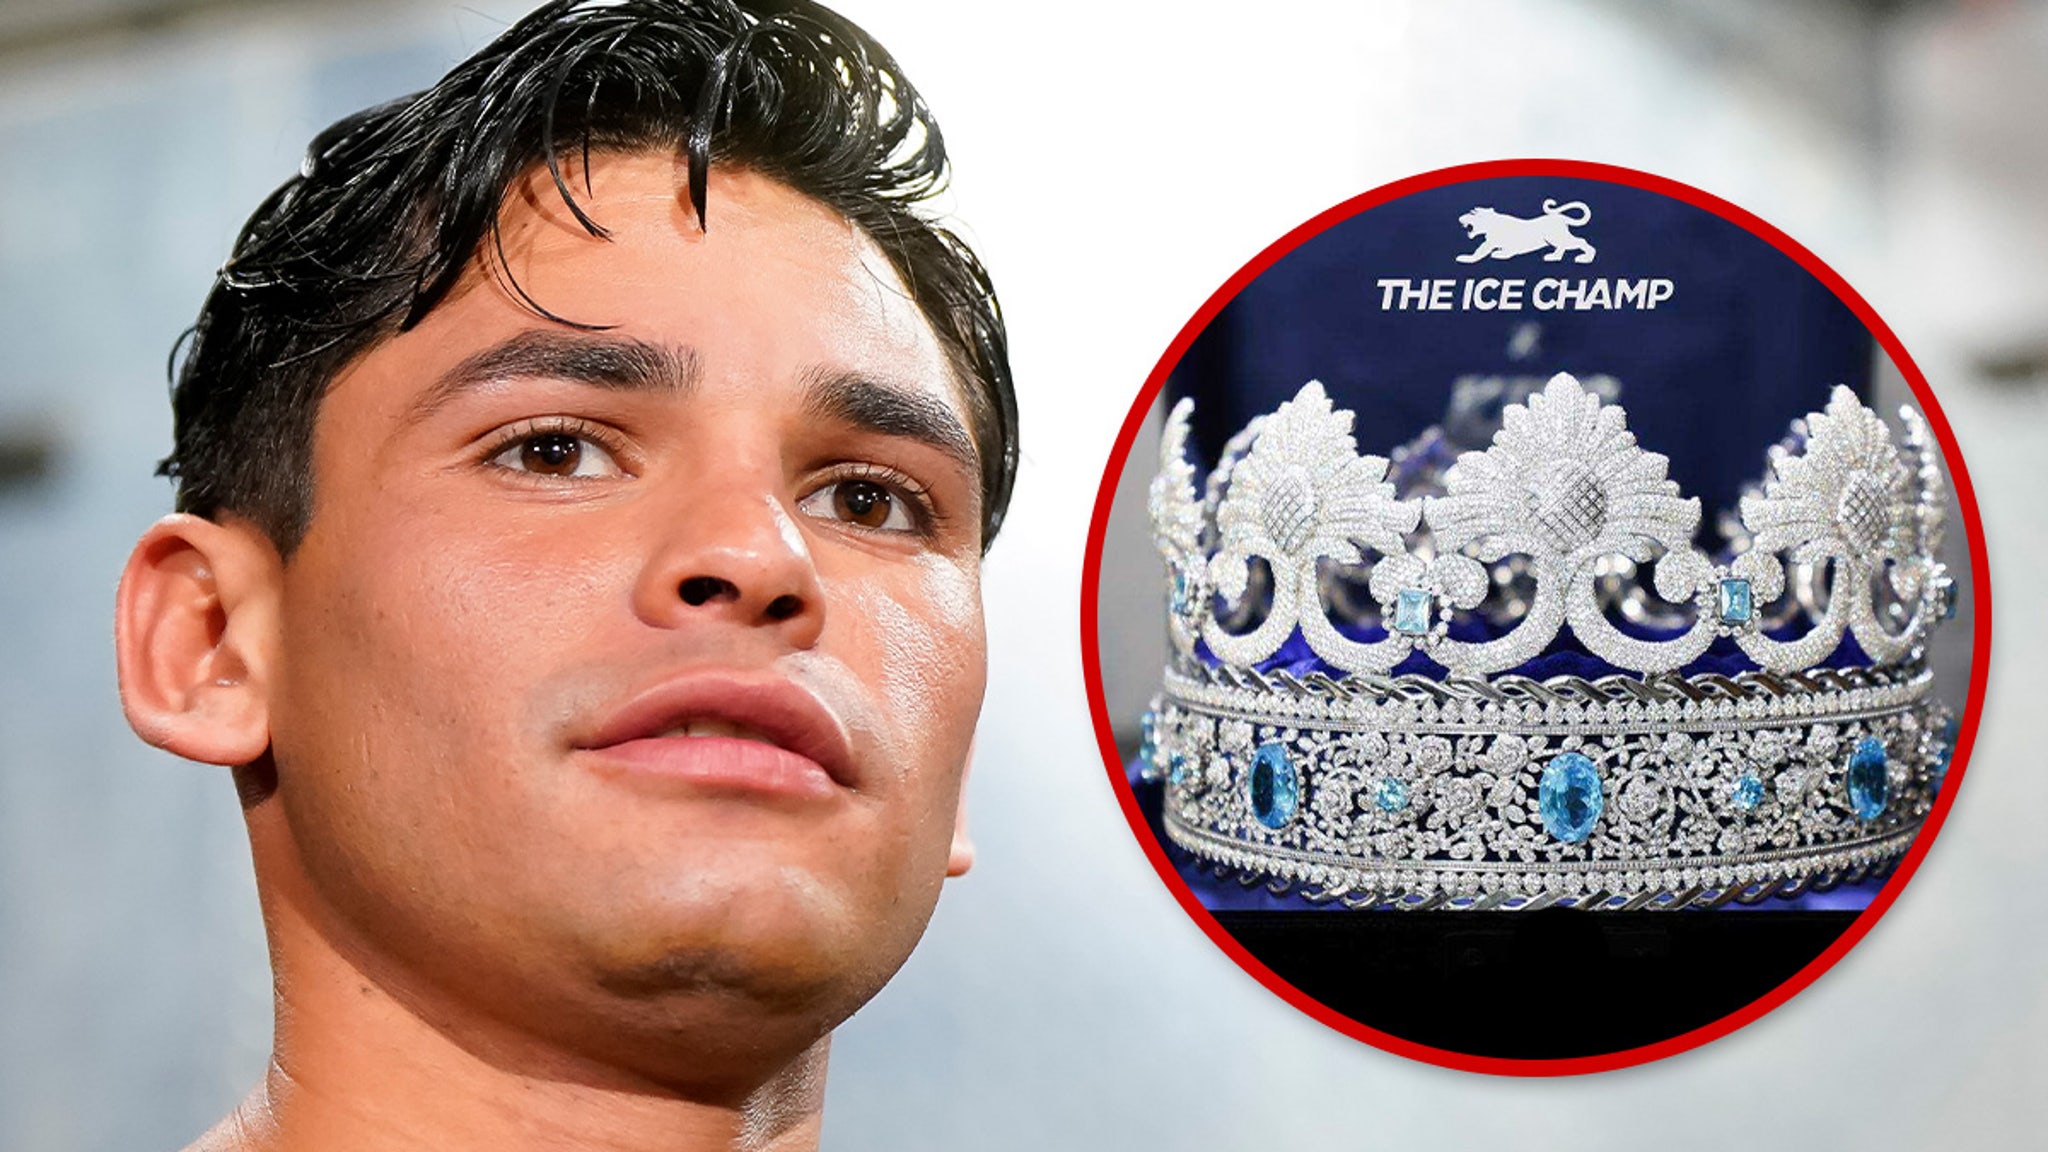 Ryan Garcia To Wear Iced-Out Crown At Devin Haney Fight, 15,000+ Diamonds!